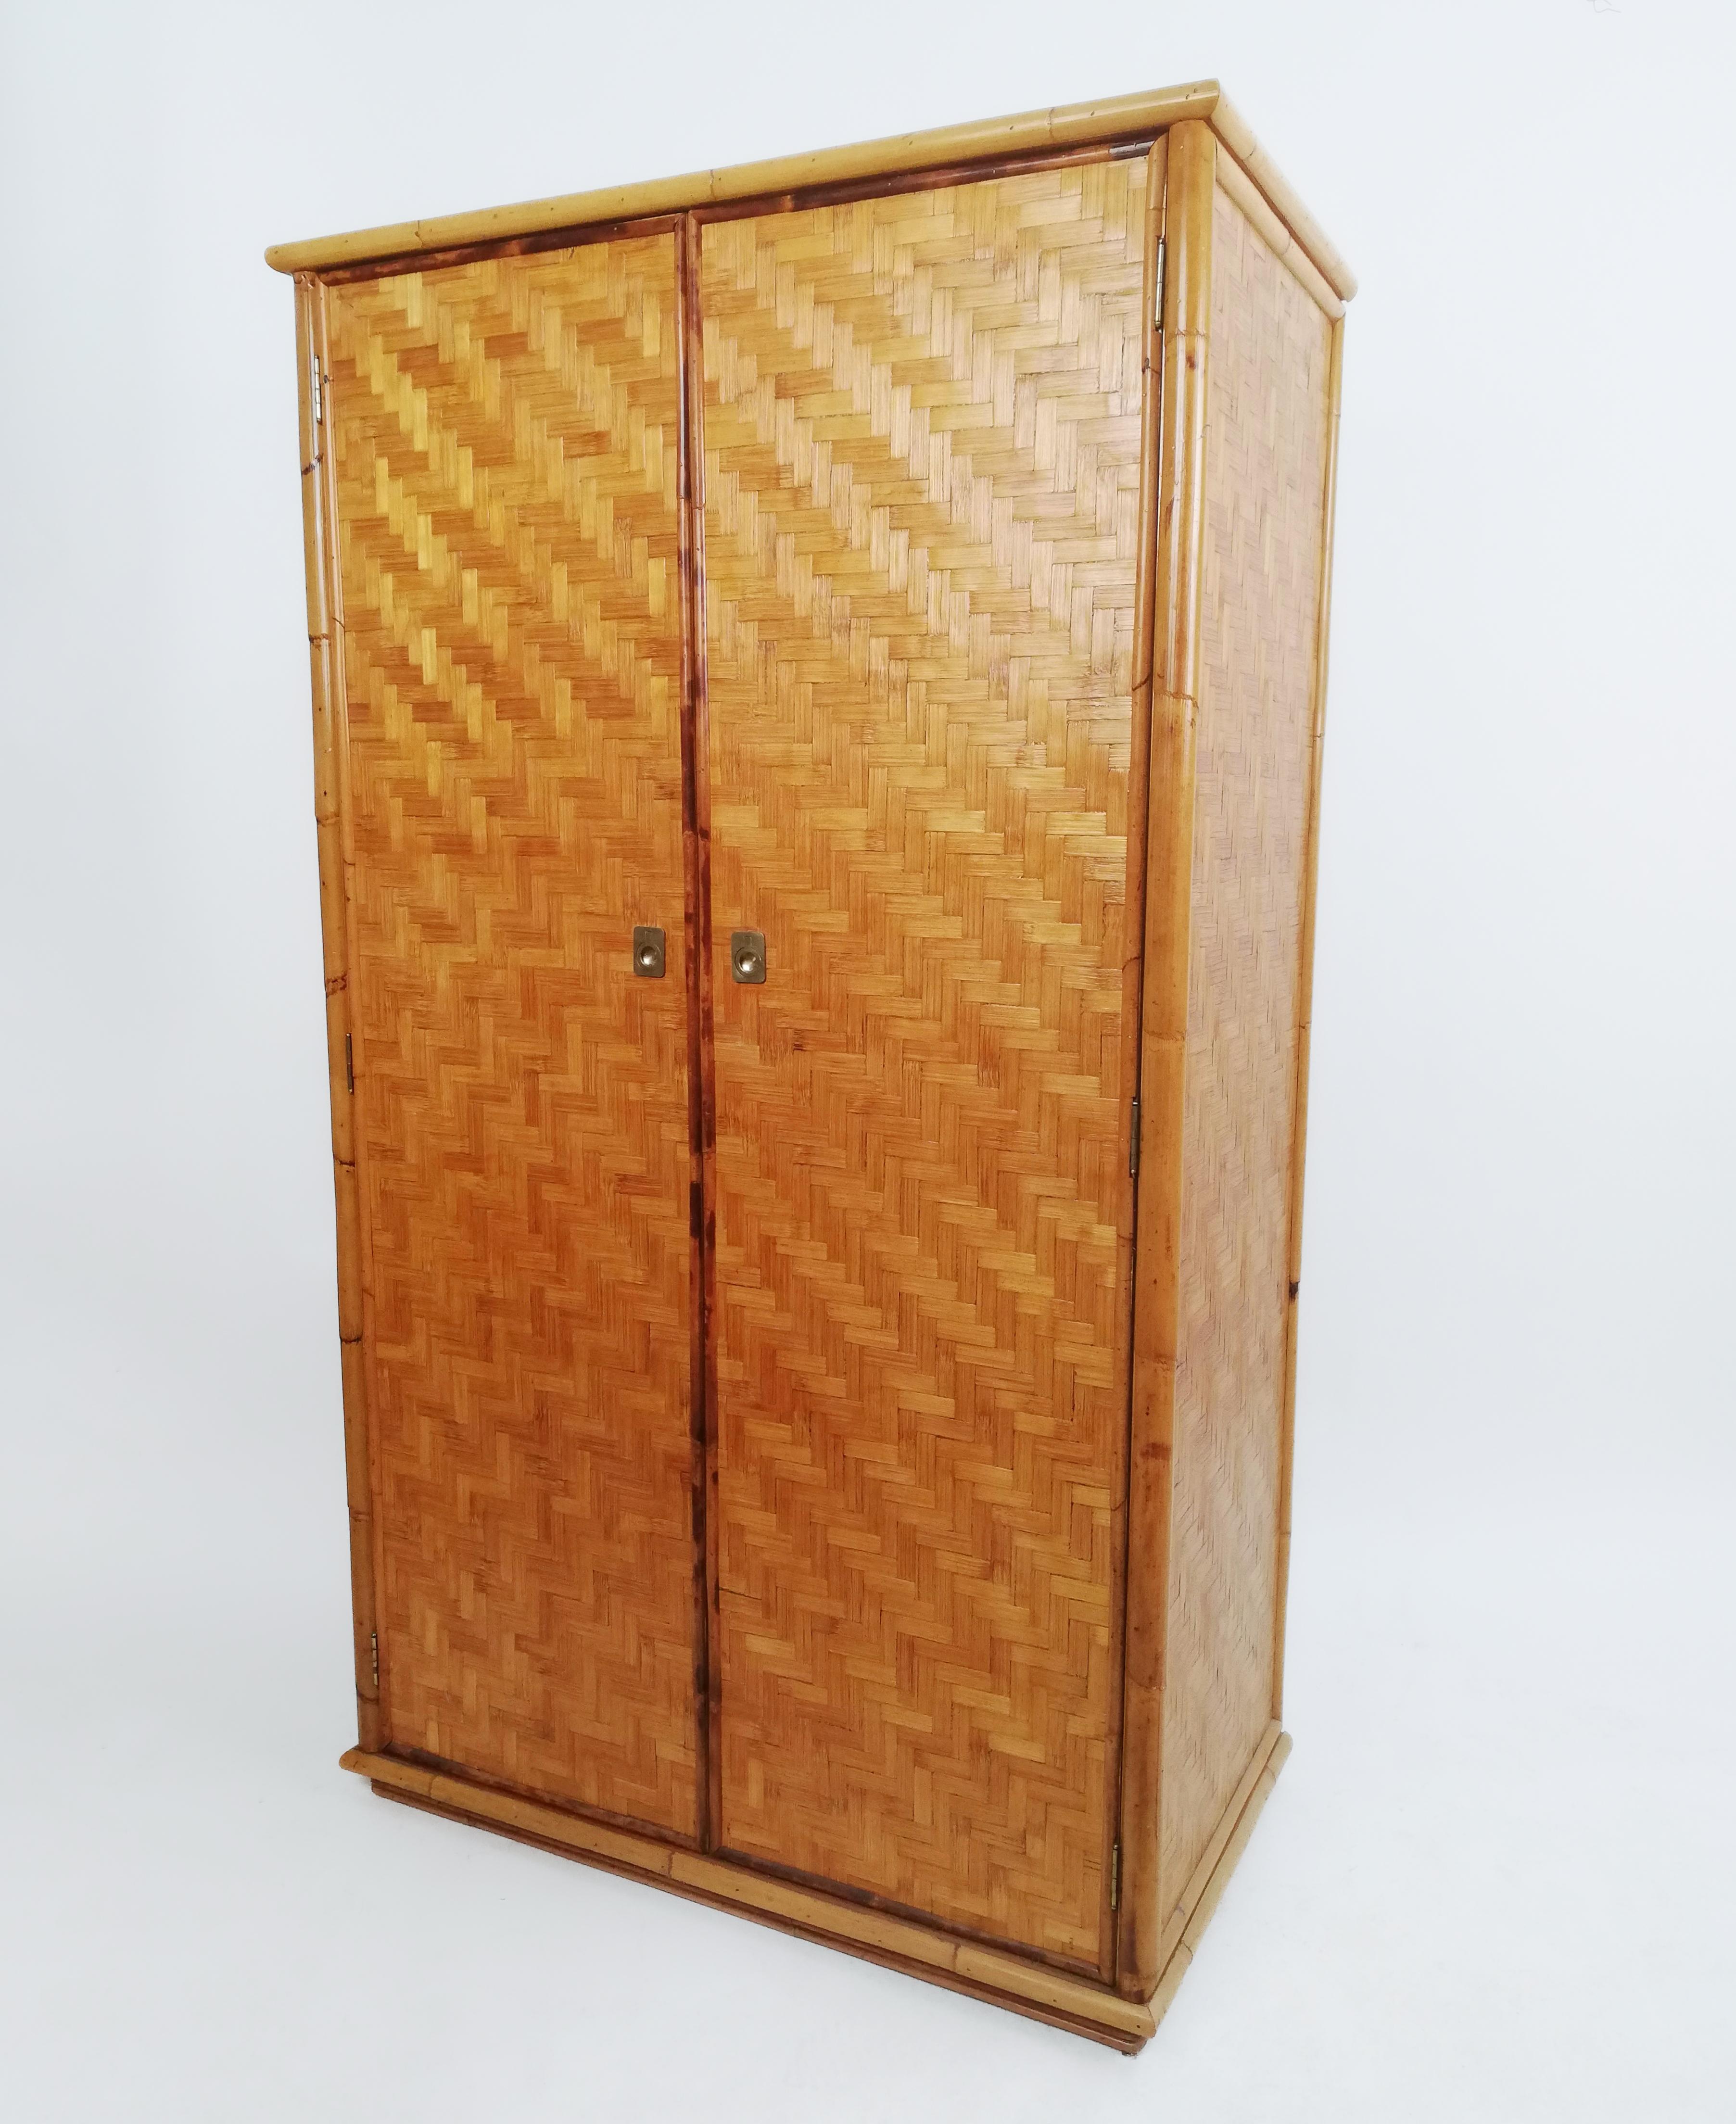 Vintage 2 Door Wardrobe in Wicker Cane, Rattan and Bamboo by Dal Vera, 1970s For Sale 4